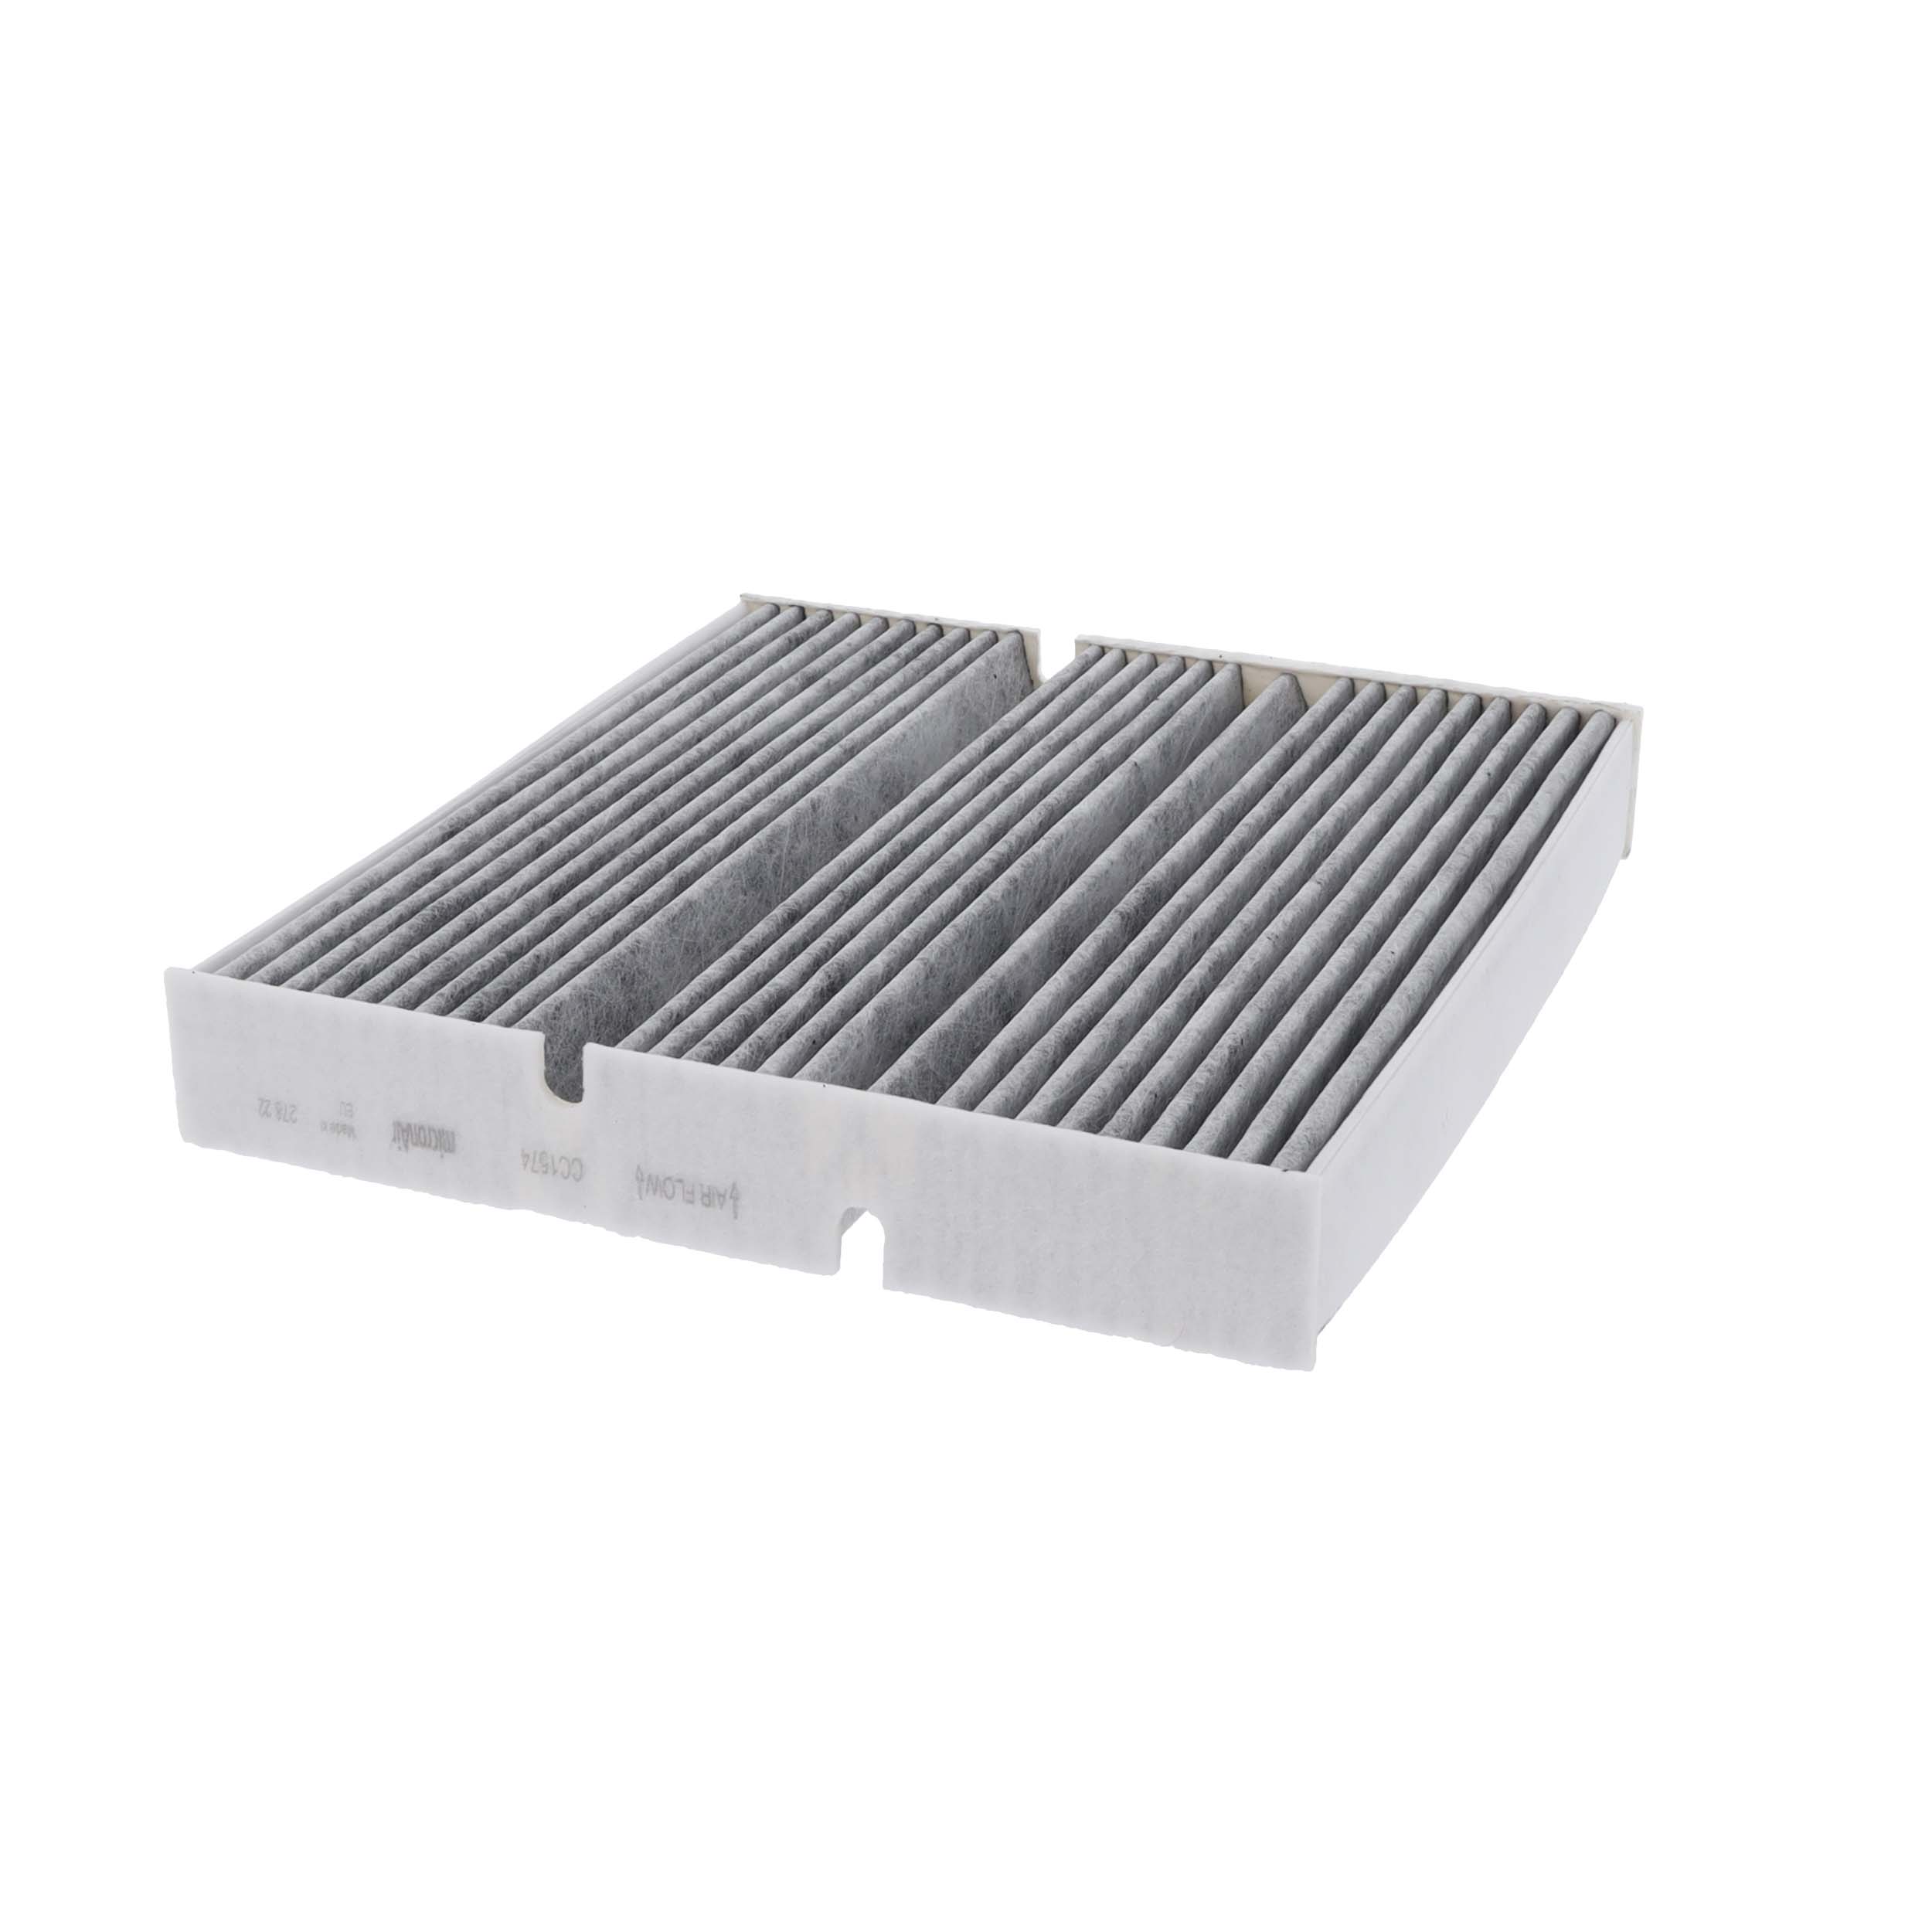 CC1571 CORTECO Activated Carbon Filter, 256 mm x 231 mm x 39 mm Width: 231mm, Height: 39mm, Length: 256mm Cabin filter 49457424 buy